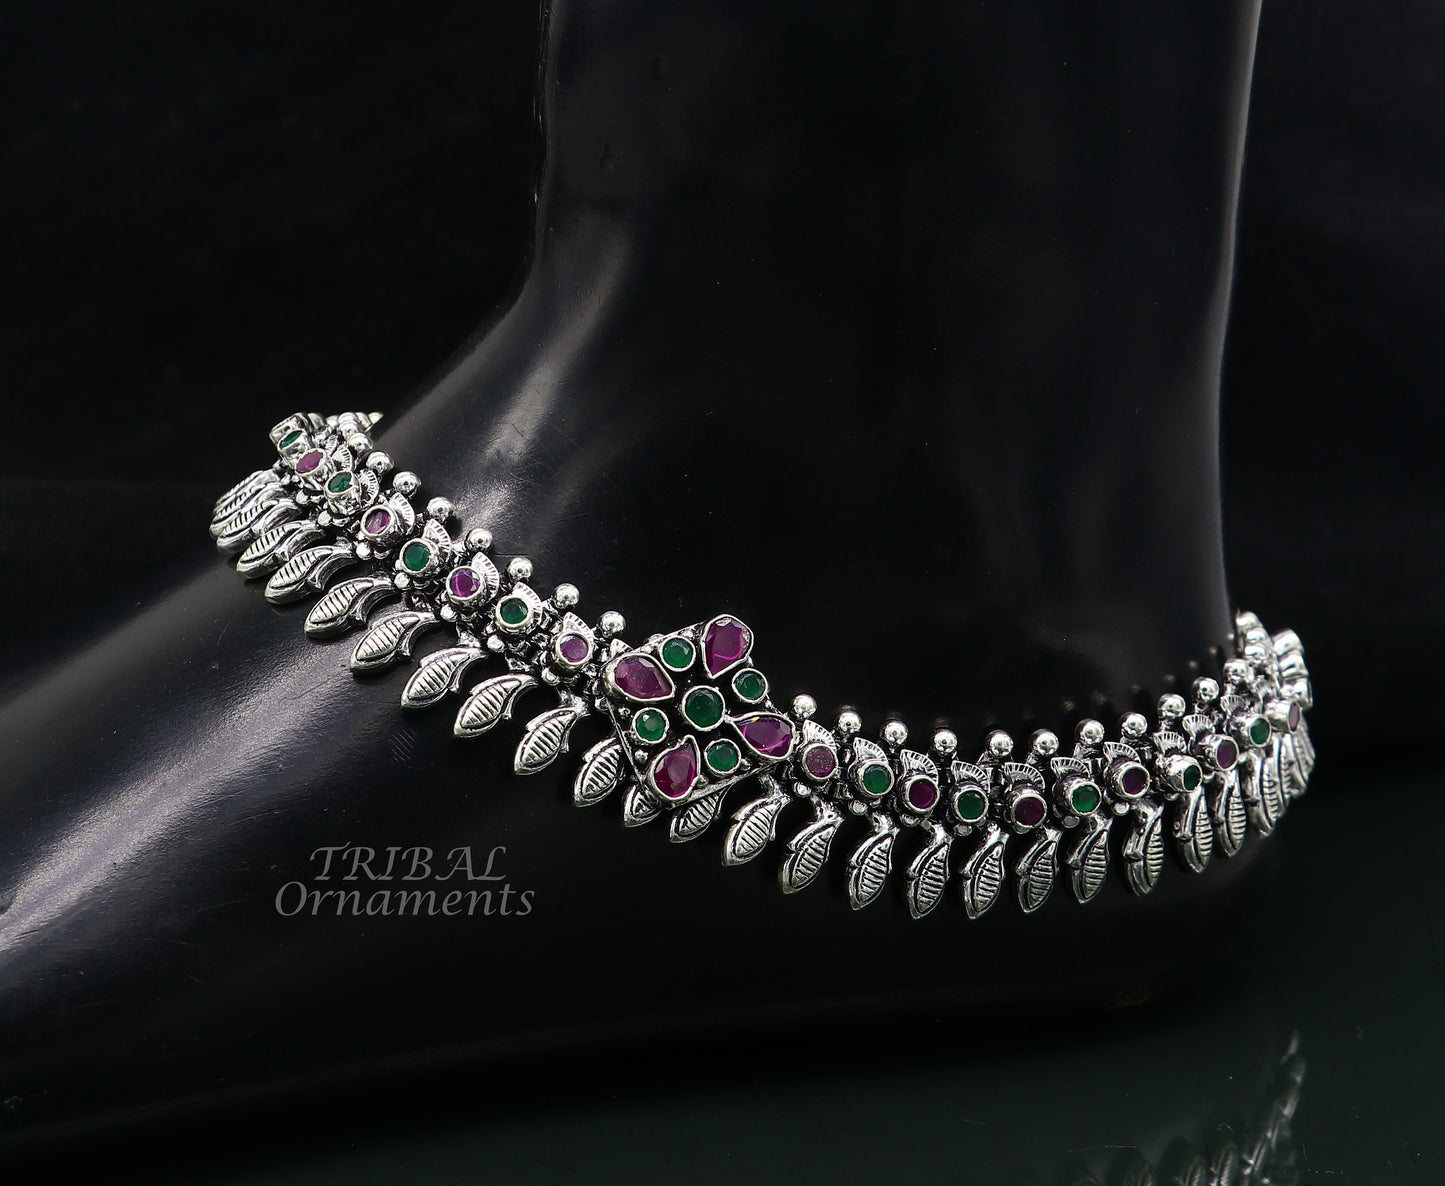 10.5" Inches long handmade 925 sterling silver fabulous color stone customized anklet bracelet, amazing anklets belly dance jewelry ank523 - TRIBAL ORNAMENTS